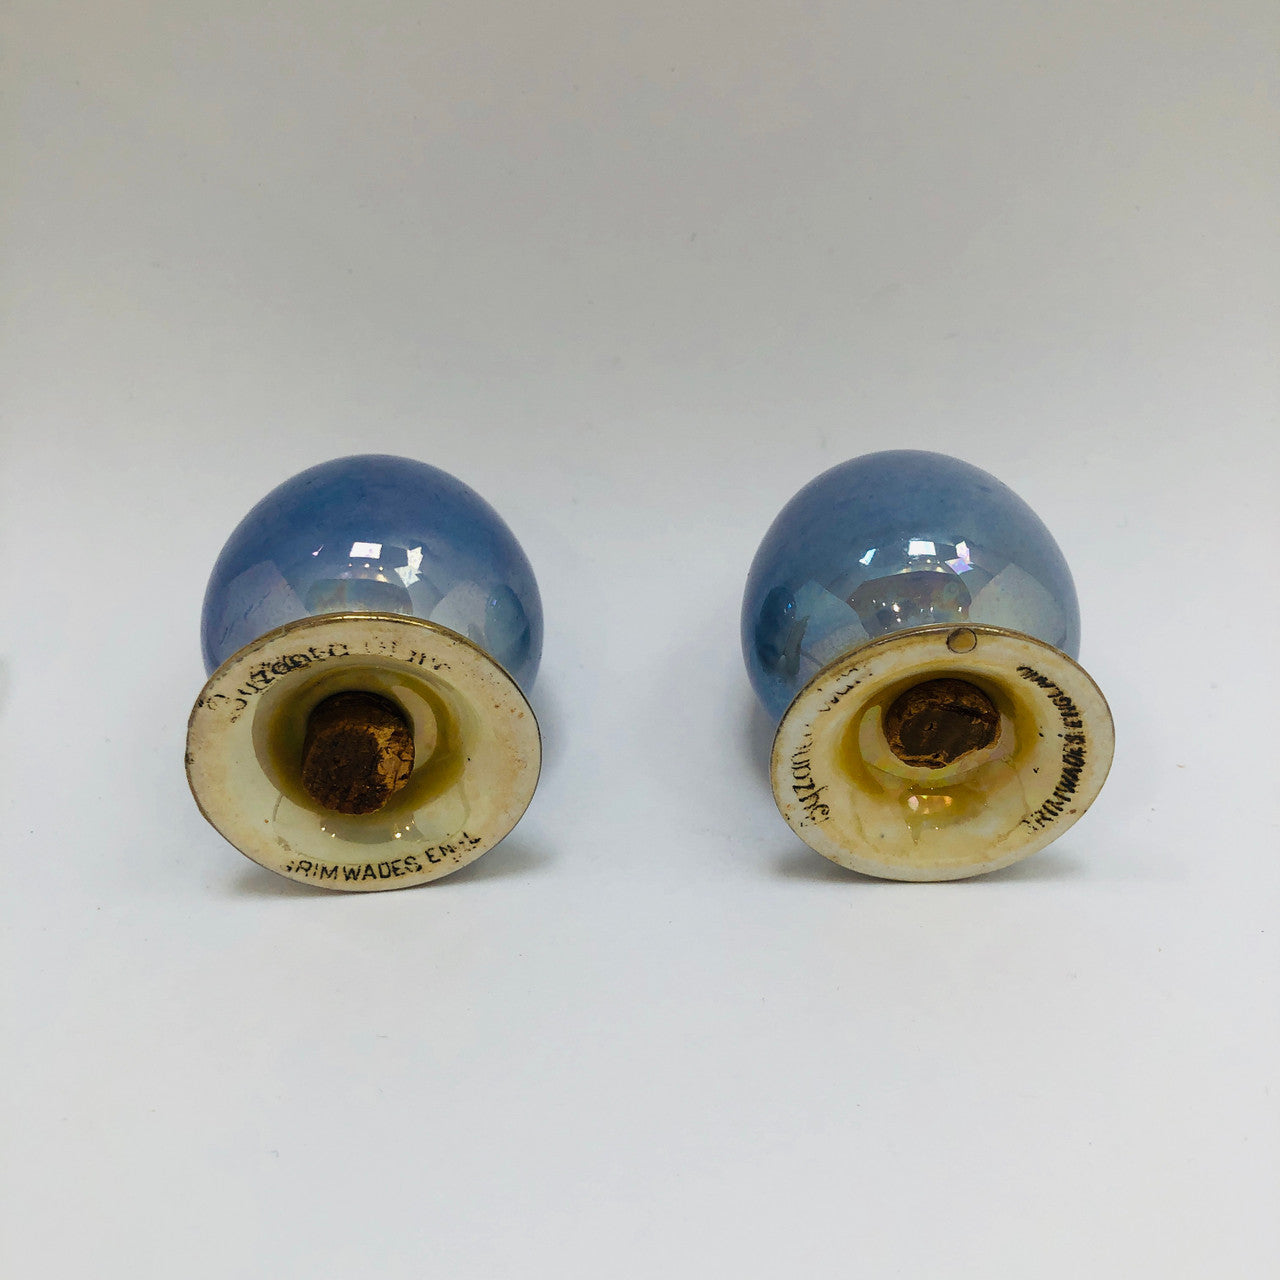 Grimwades, Blue Byzanta ware, Egg Shaped salt and pepper shakers, pair, ~1920s, England